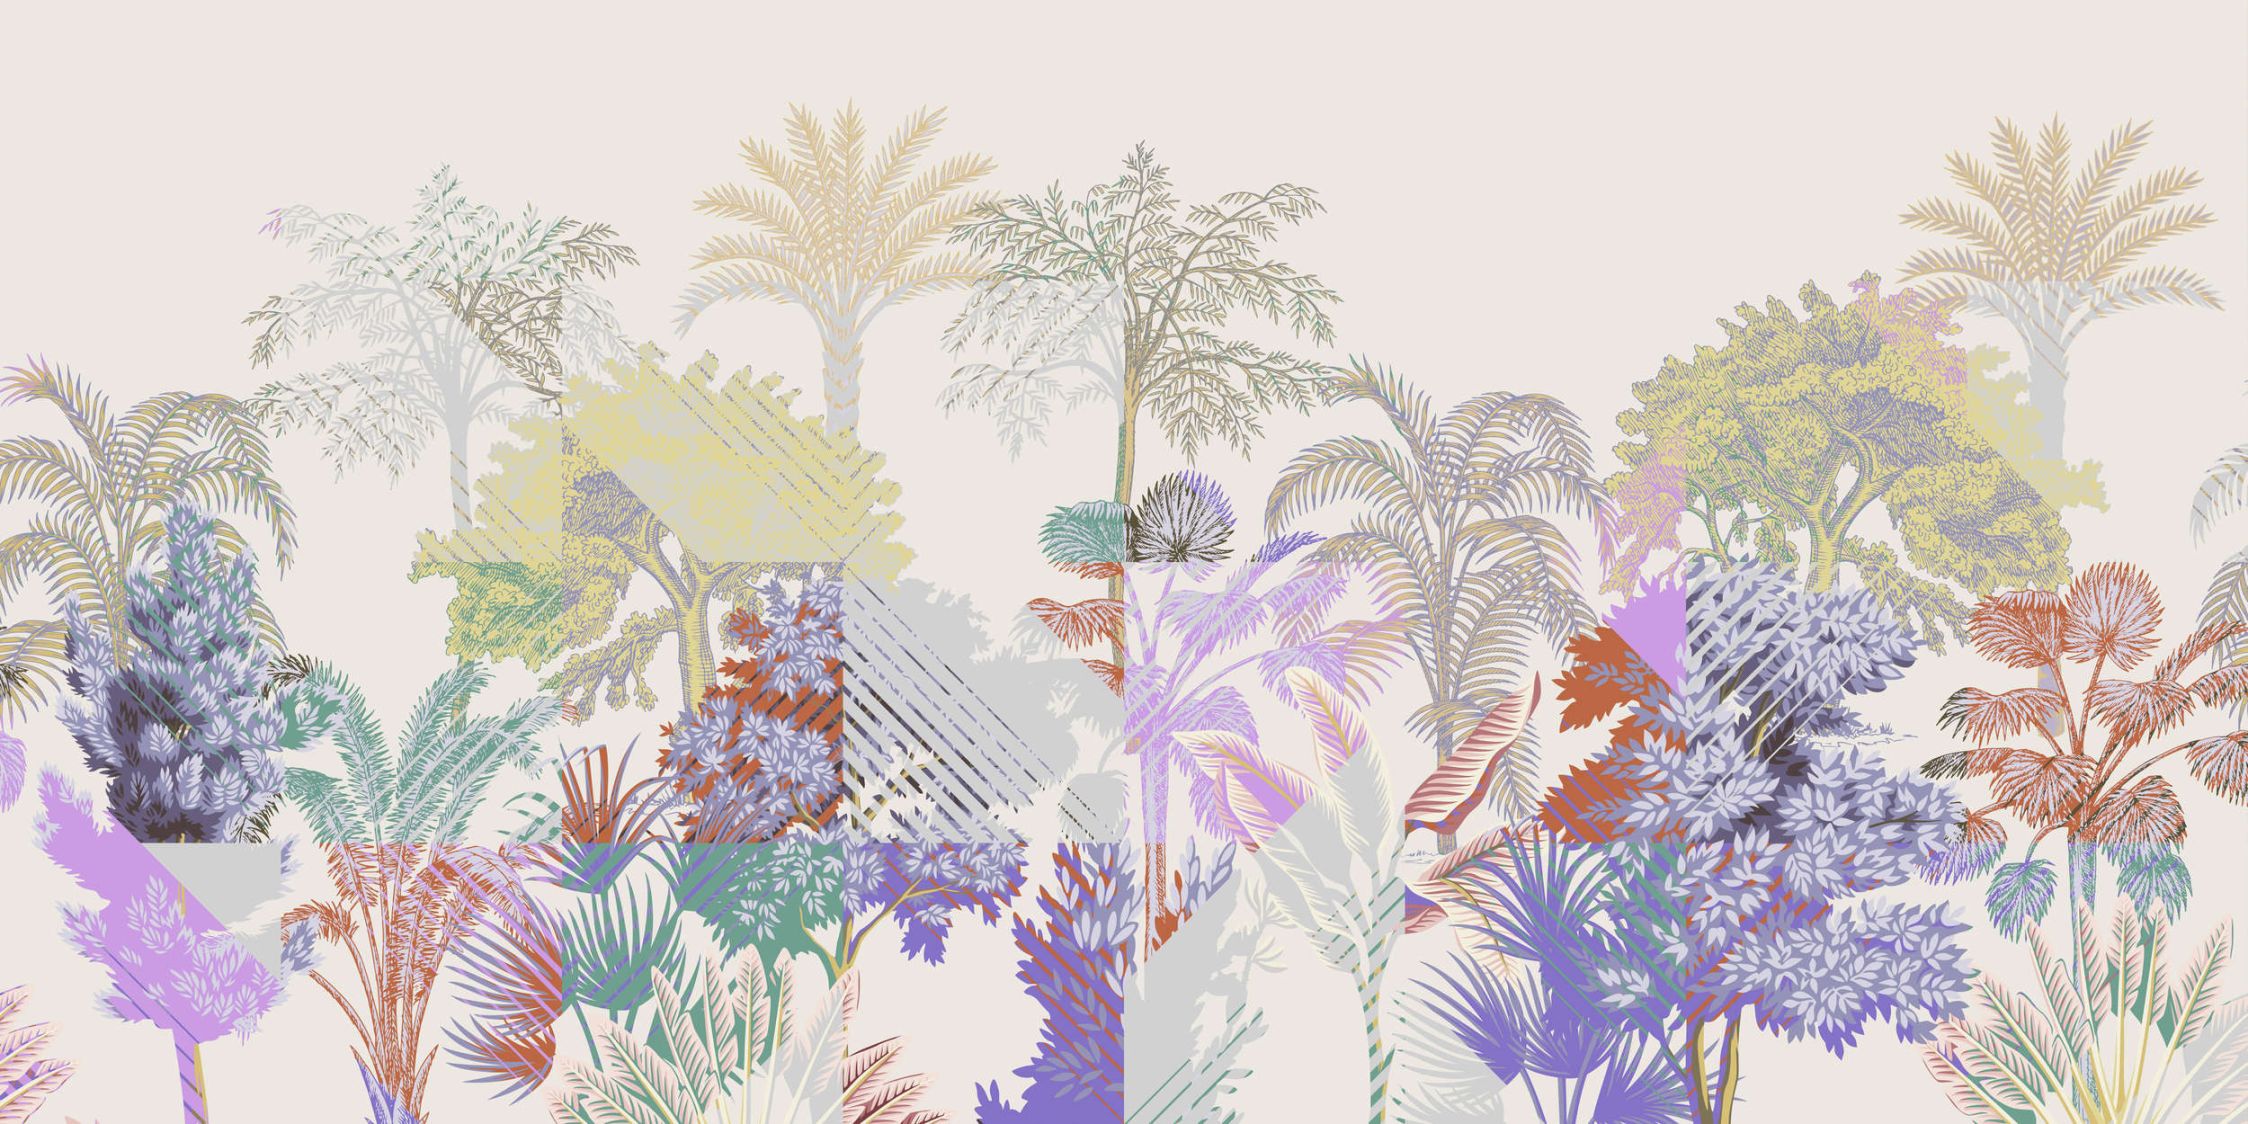             Photo wallpaper »esplanade 2« - jungle patchwork with bushes - colourful | Smooth, slightly shiny premium non-woven fabric
        